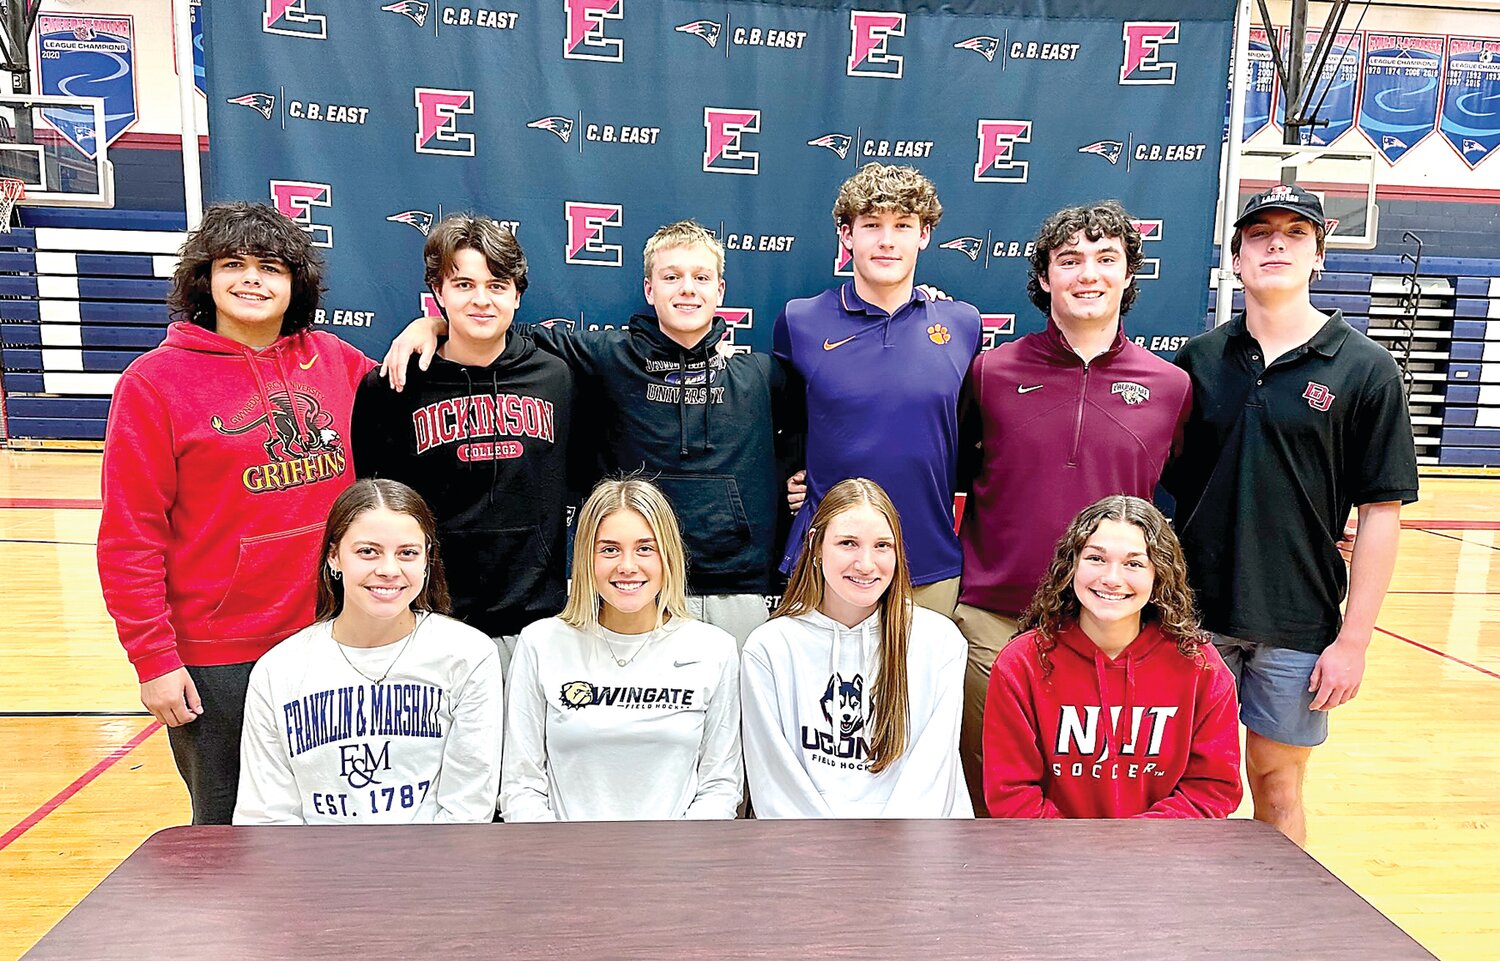 Ten Central Bucks East seniors were recognized on Nov. 13 for their commitment to compete in collegiate sports. From left are: front row, Grace Craig, Audra Szymborski, Paige Keller, Sofia Mignon; back row, David Crespo, Sam Bliss, Reece Moody, Chase Harlan, Jack Mislan and Patrick Coleman.